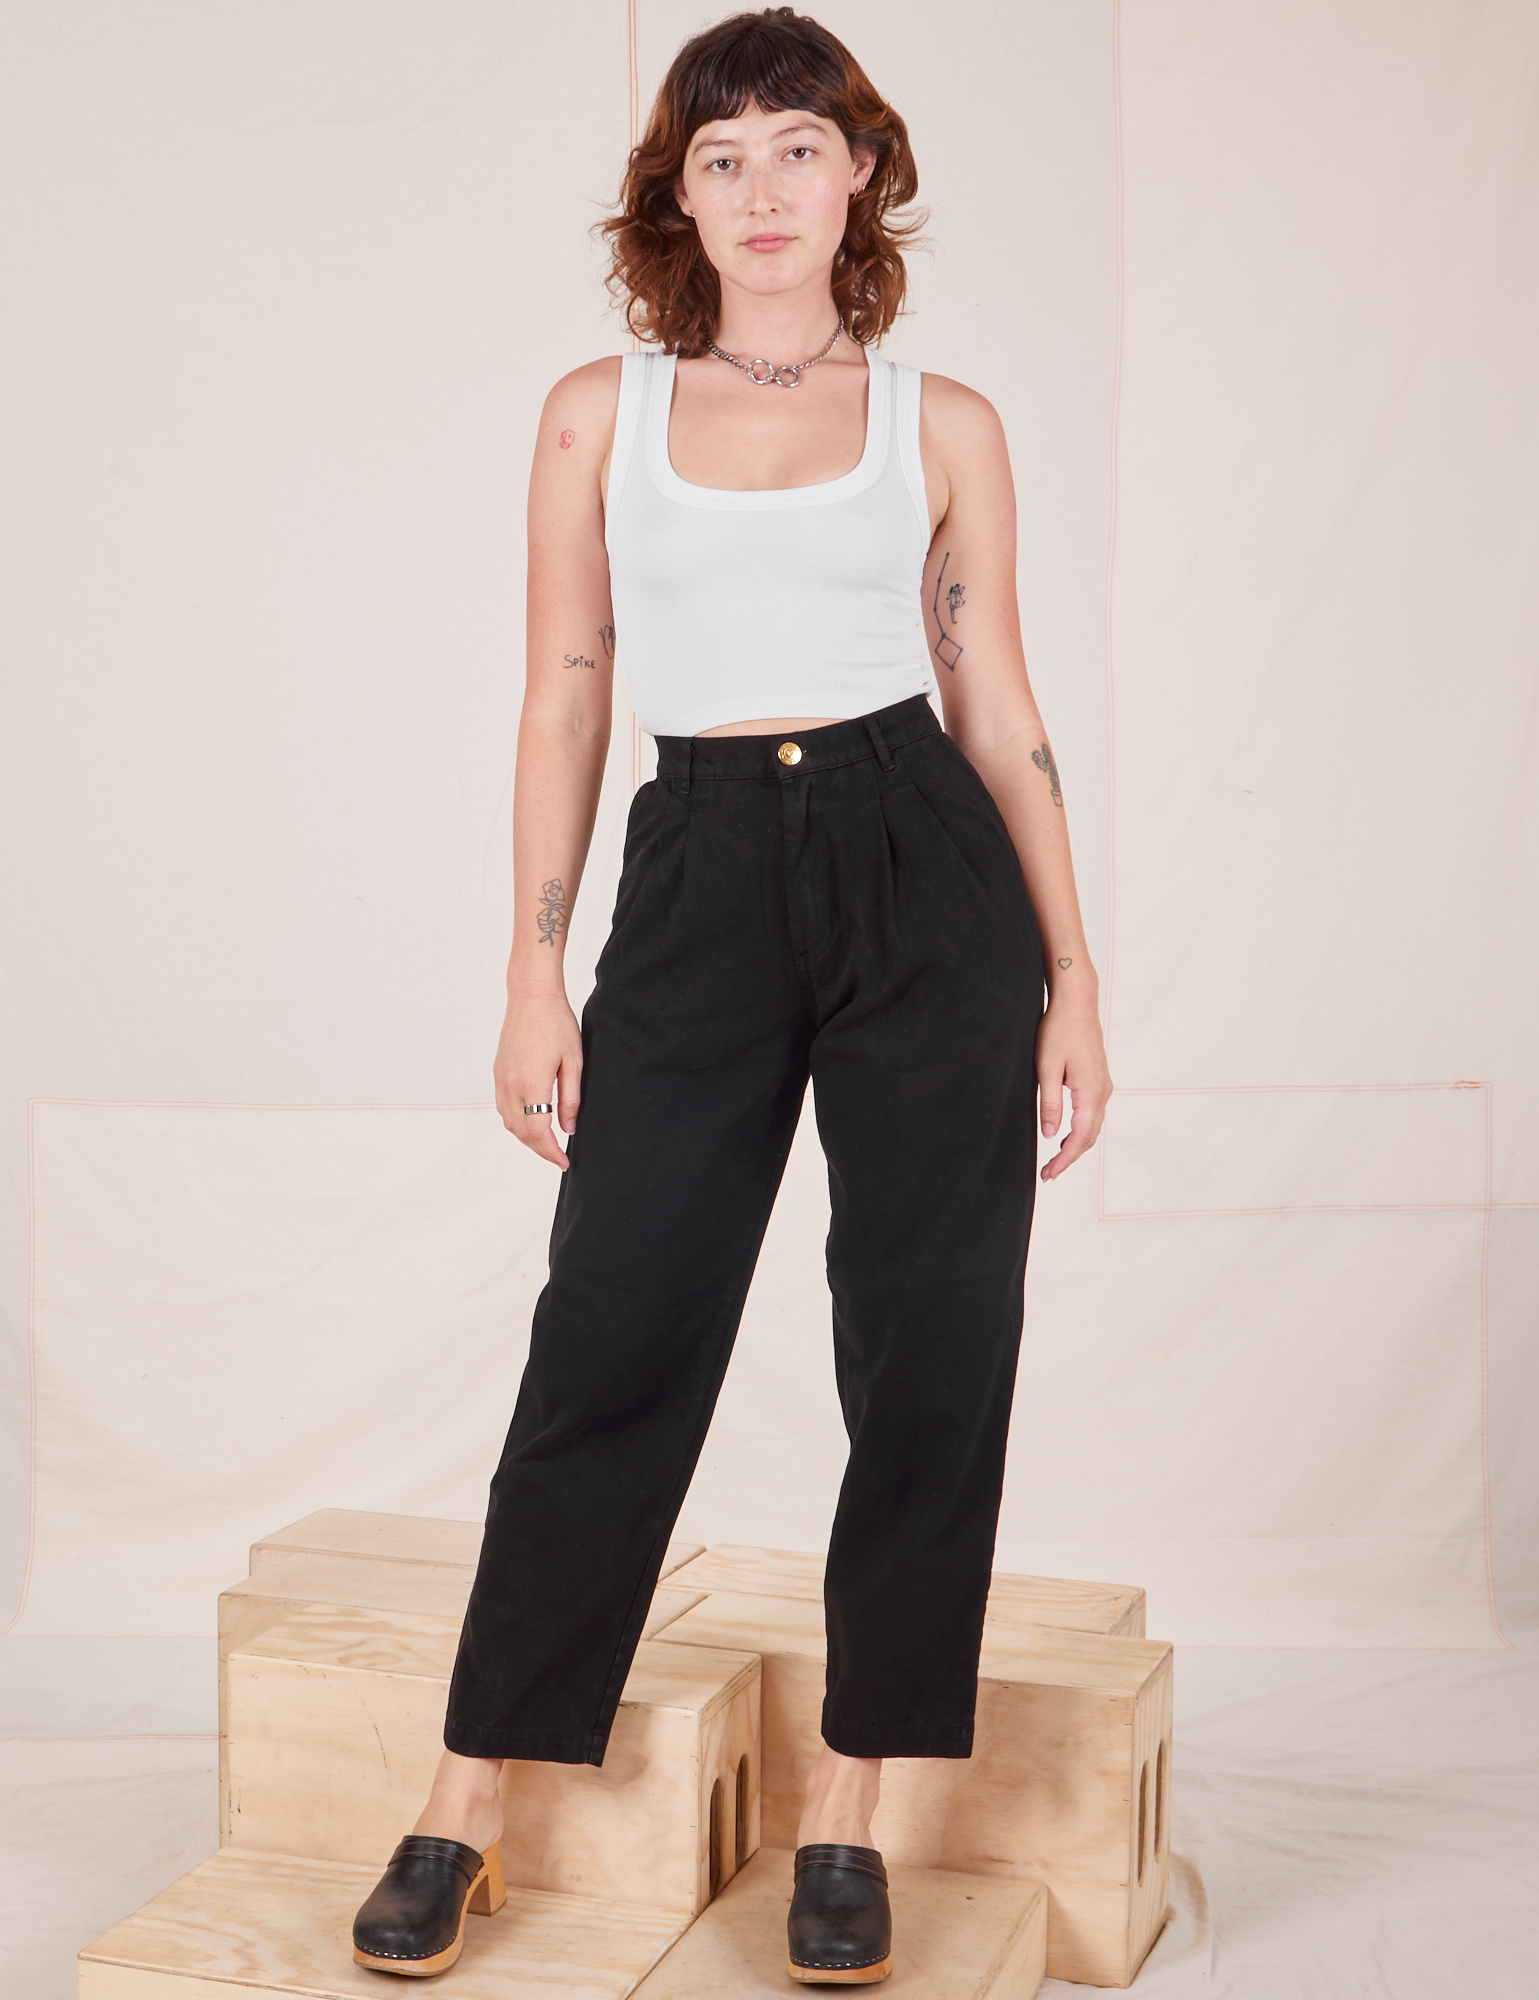 Alex is 5&#39;8&quot; and wearing XXS Heavyweight Trousers in Basic Black paired with Cropped Tank Top in vintage tee off-white